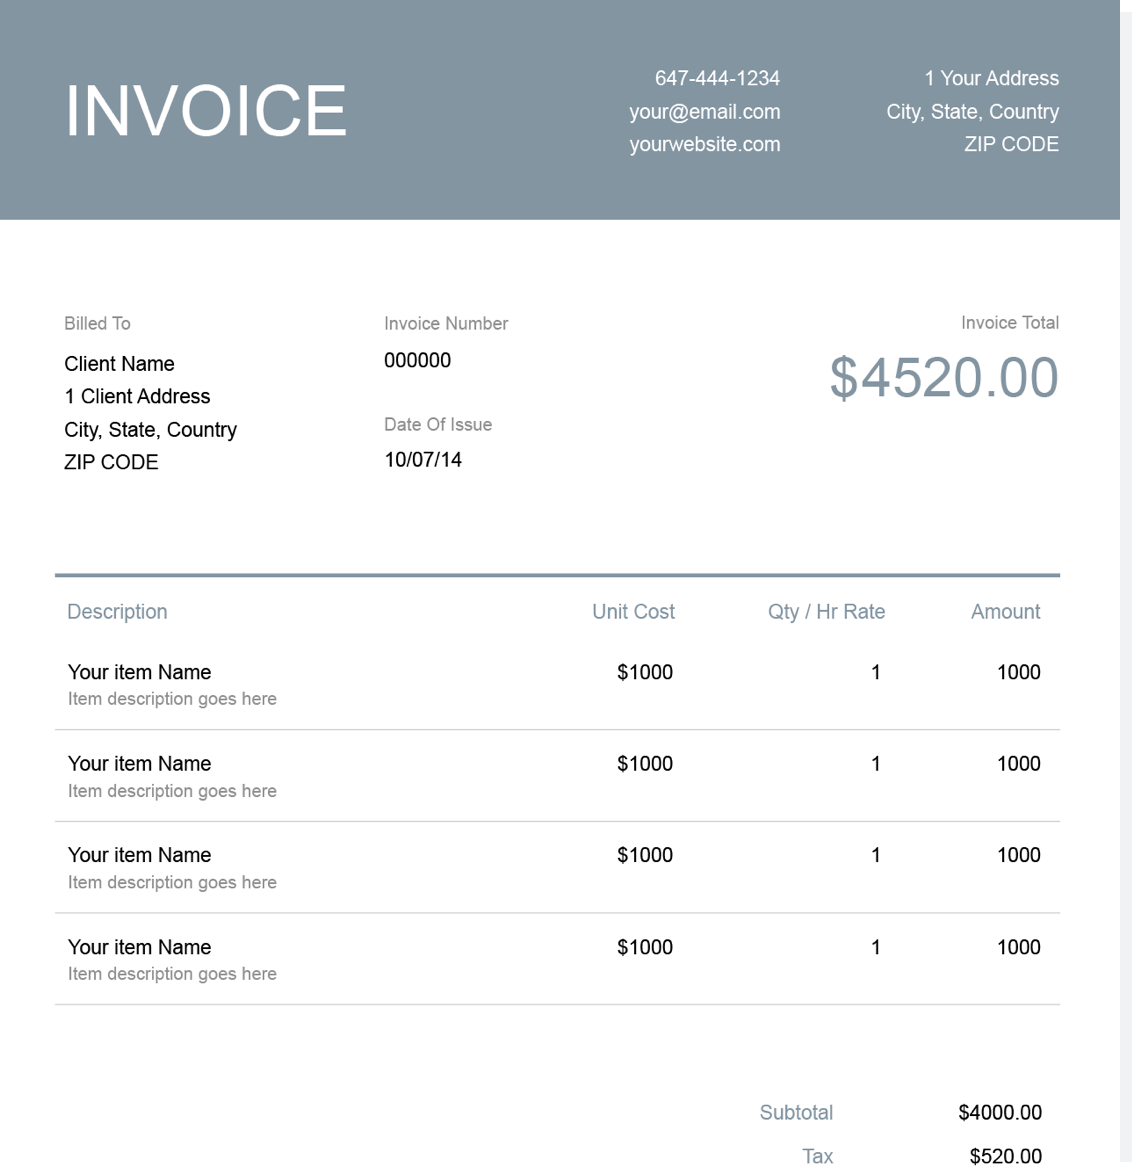 4 Ways to Make an Invoice